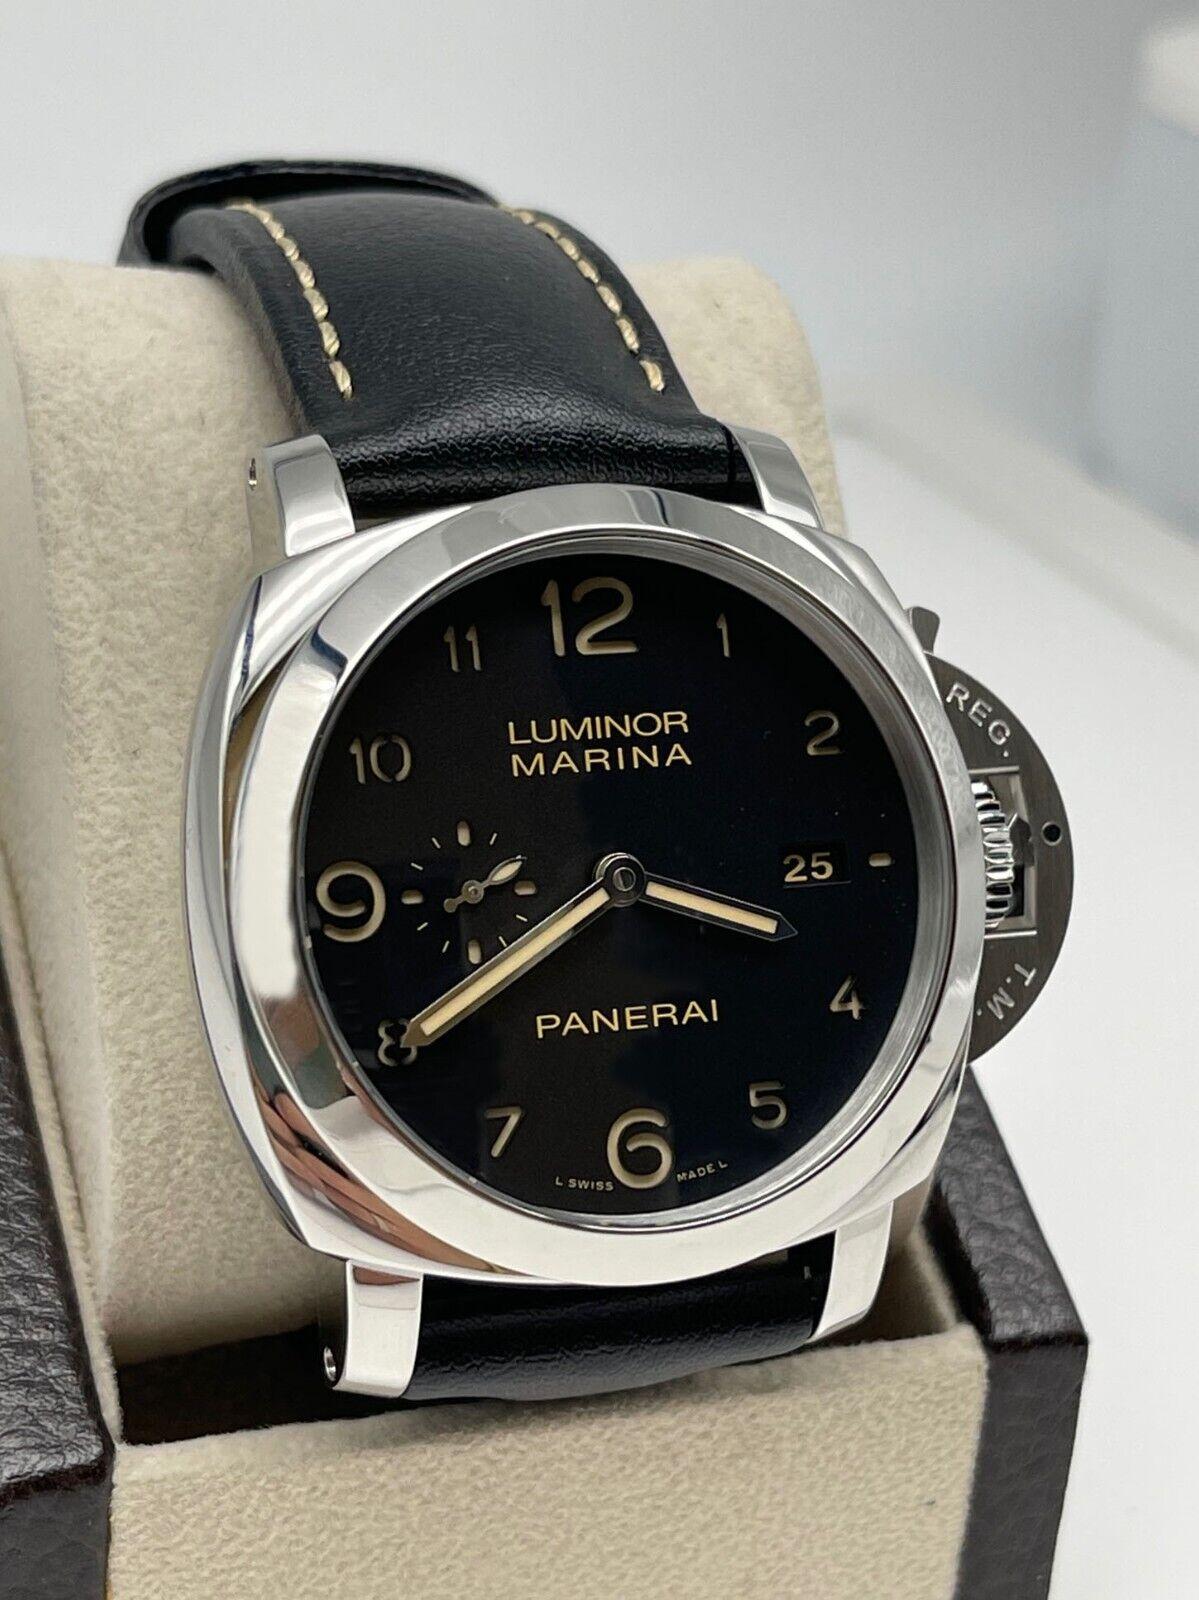 Style Number: PAM00359


Year: 2016

 

Model: Luminor Marina 1950

 

Case Material: Stainless Steel

 

Band: Black Leather

 

Bezel: Stainless Steel

 

Dial: Black with luminescent Arabic numerals

 

Face: Sapphire Crystal

 

Case Size: